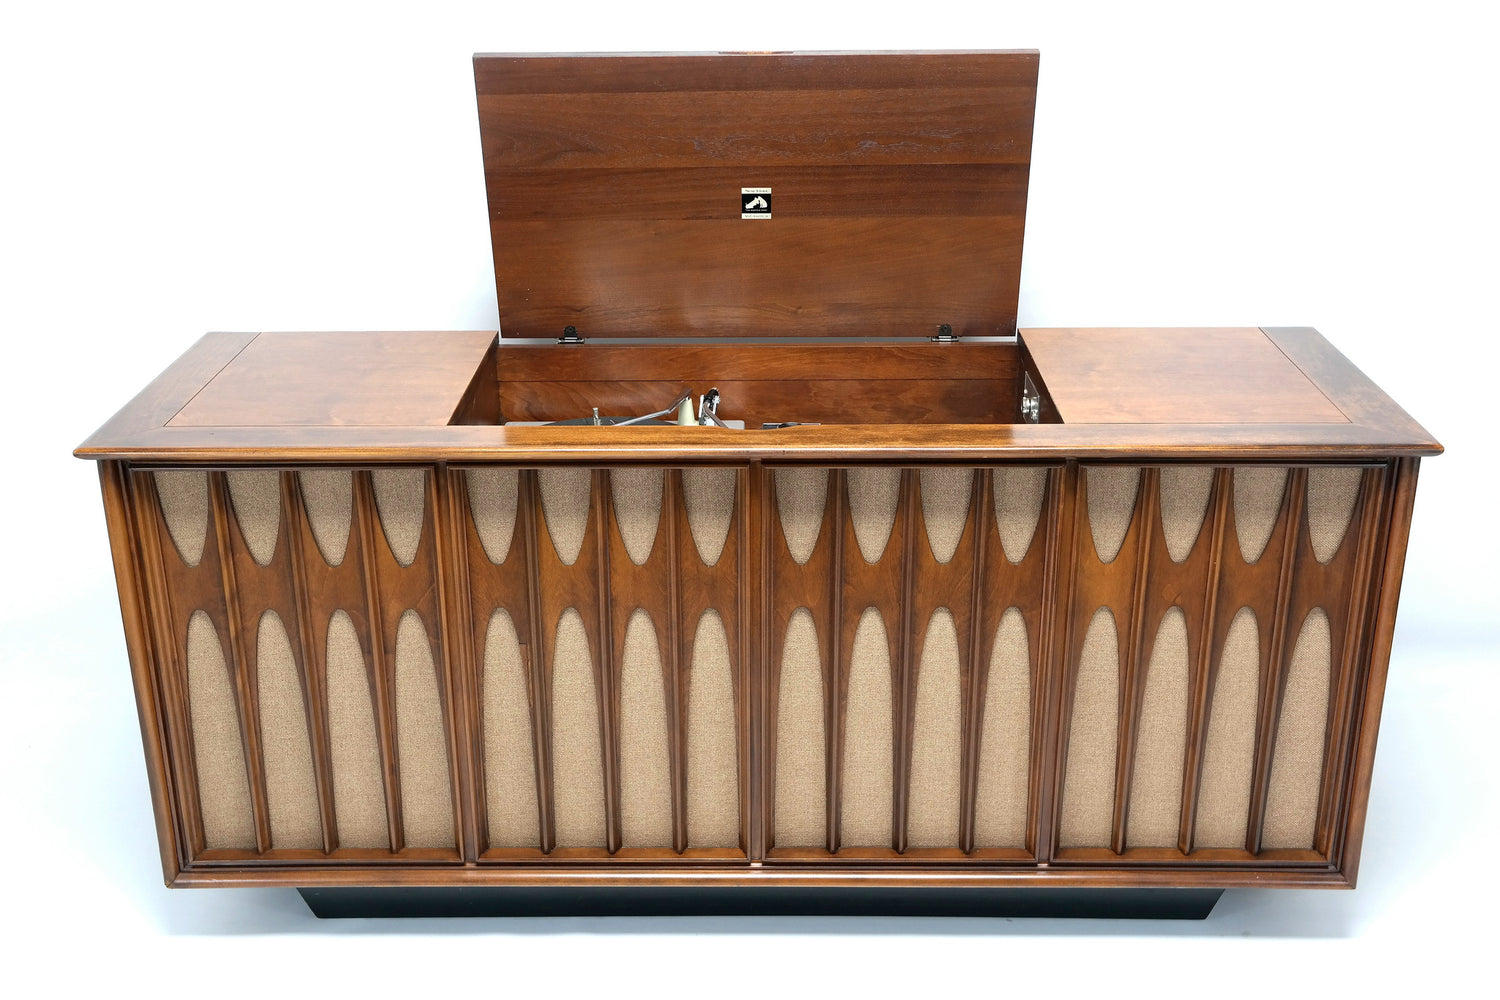 MCM - 60's - Mid Century RCA Stereo Console Record Player - Bluetooth - Input AM/FM Tuner The Vintedge Co.